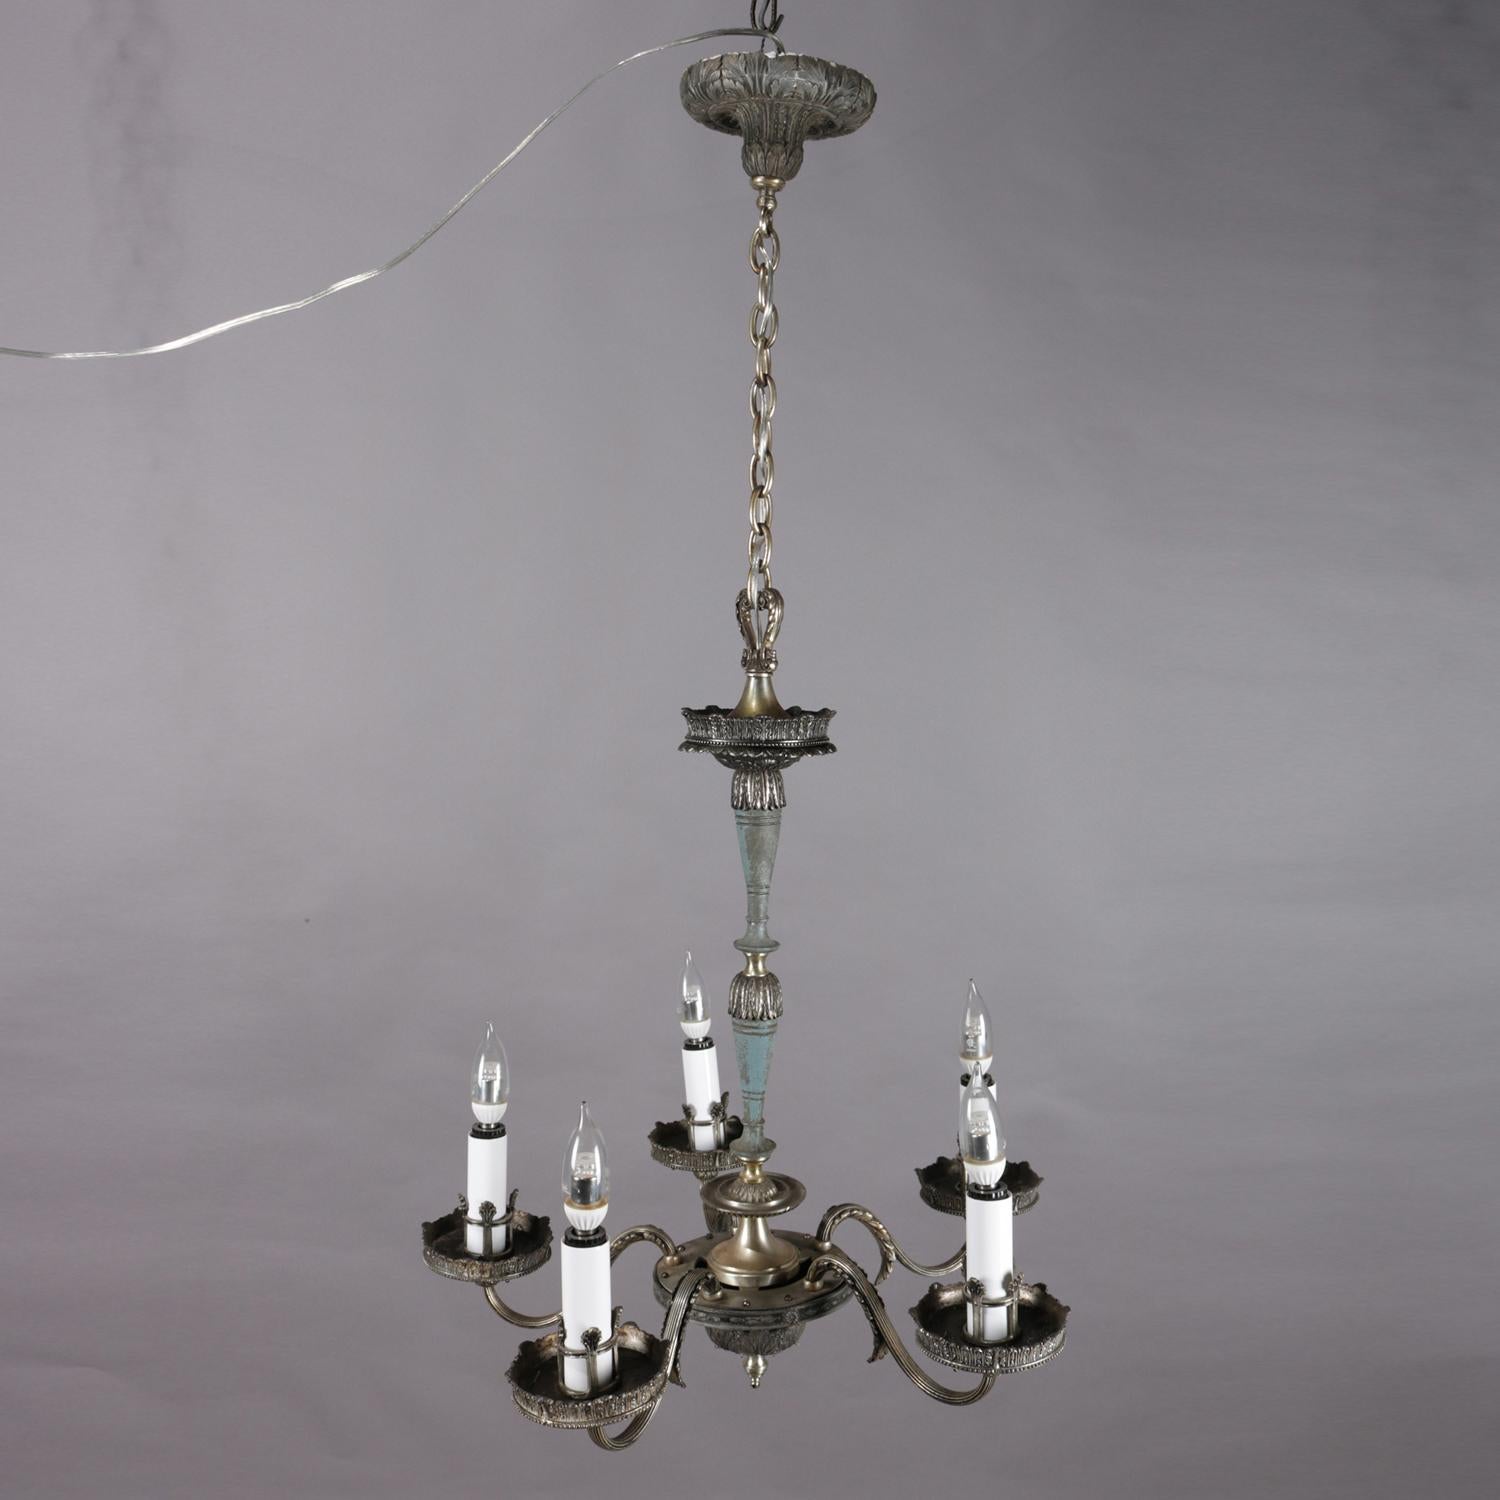 A French Empire style branch chandelier features silver gilt metal frame having five s-scroll arms terminating in oversized bobeches and candle lights, cast foliate acanthus leaves throughout, receptors for hanging prisms if desired, professionally